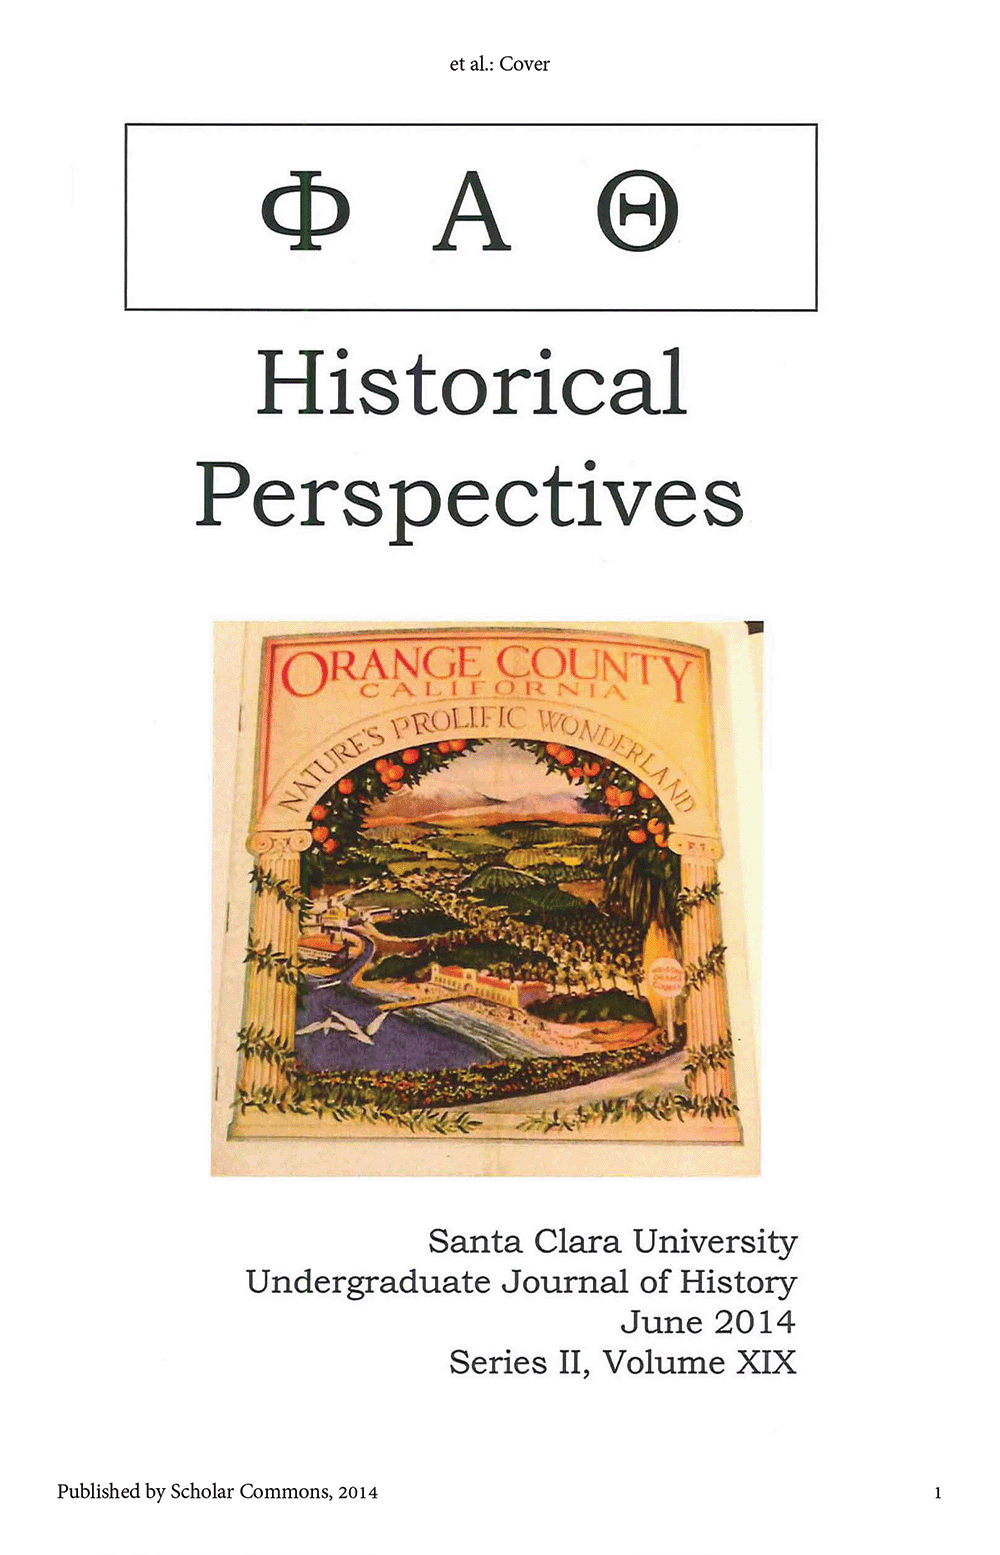 Historical Perspectives 2014, volume 19